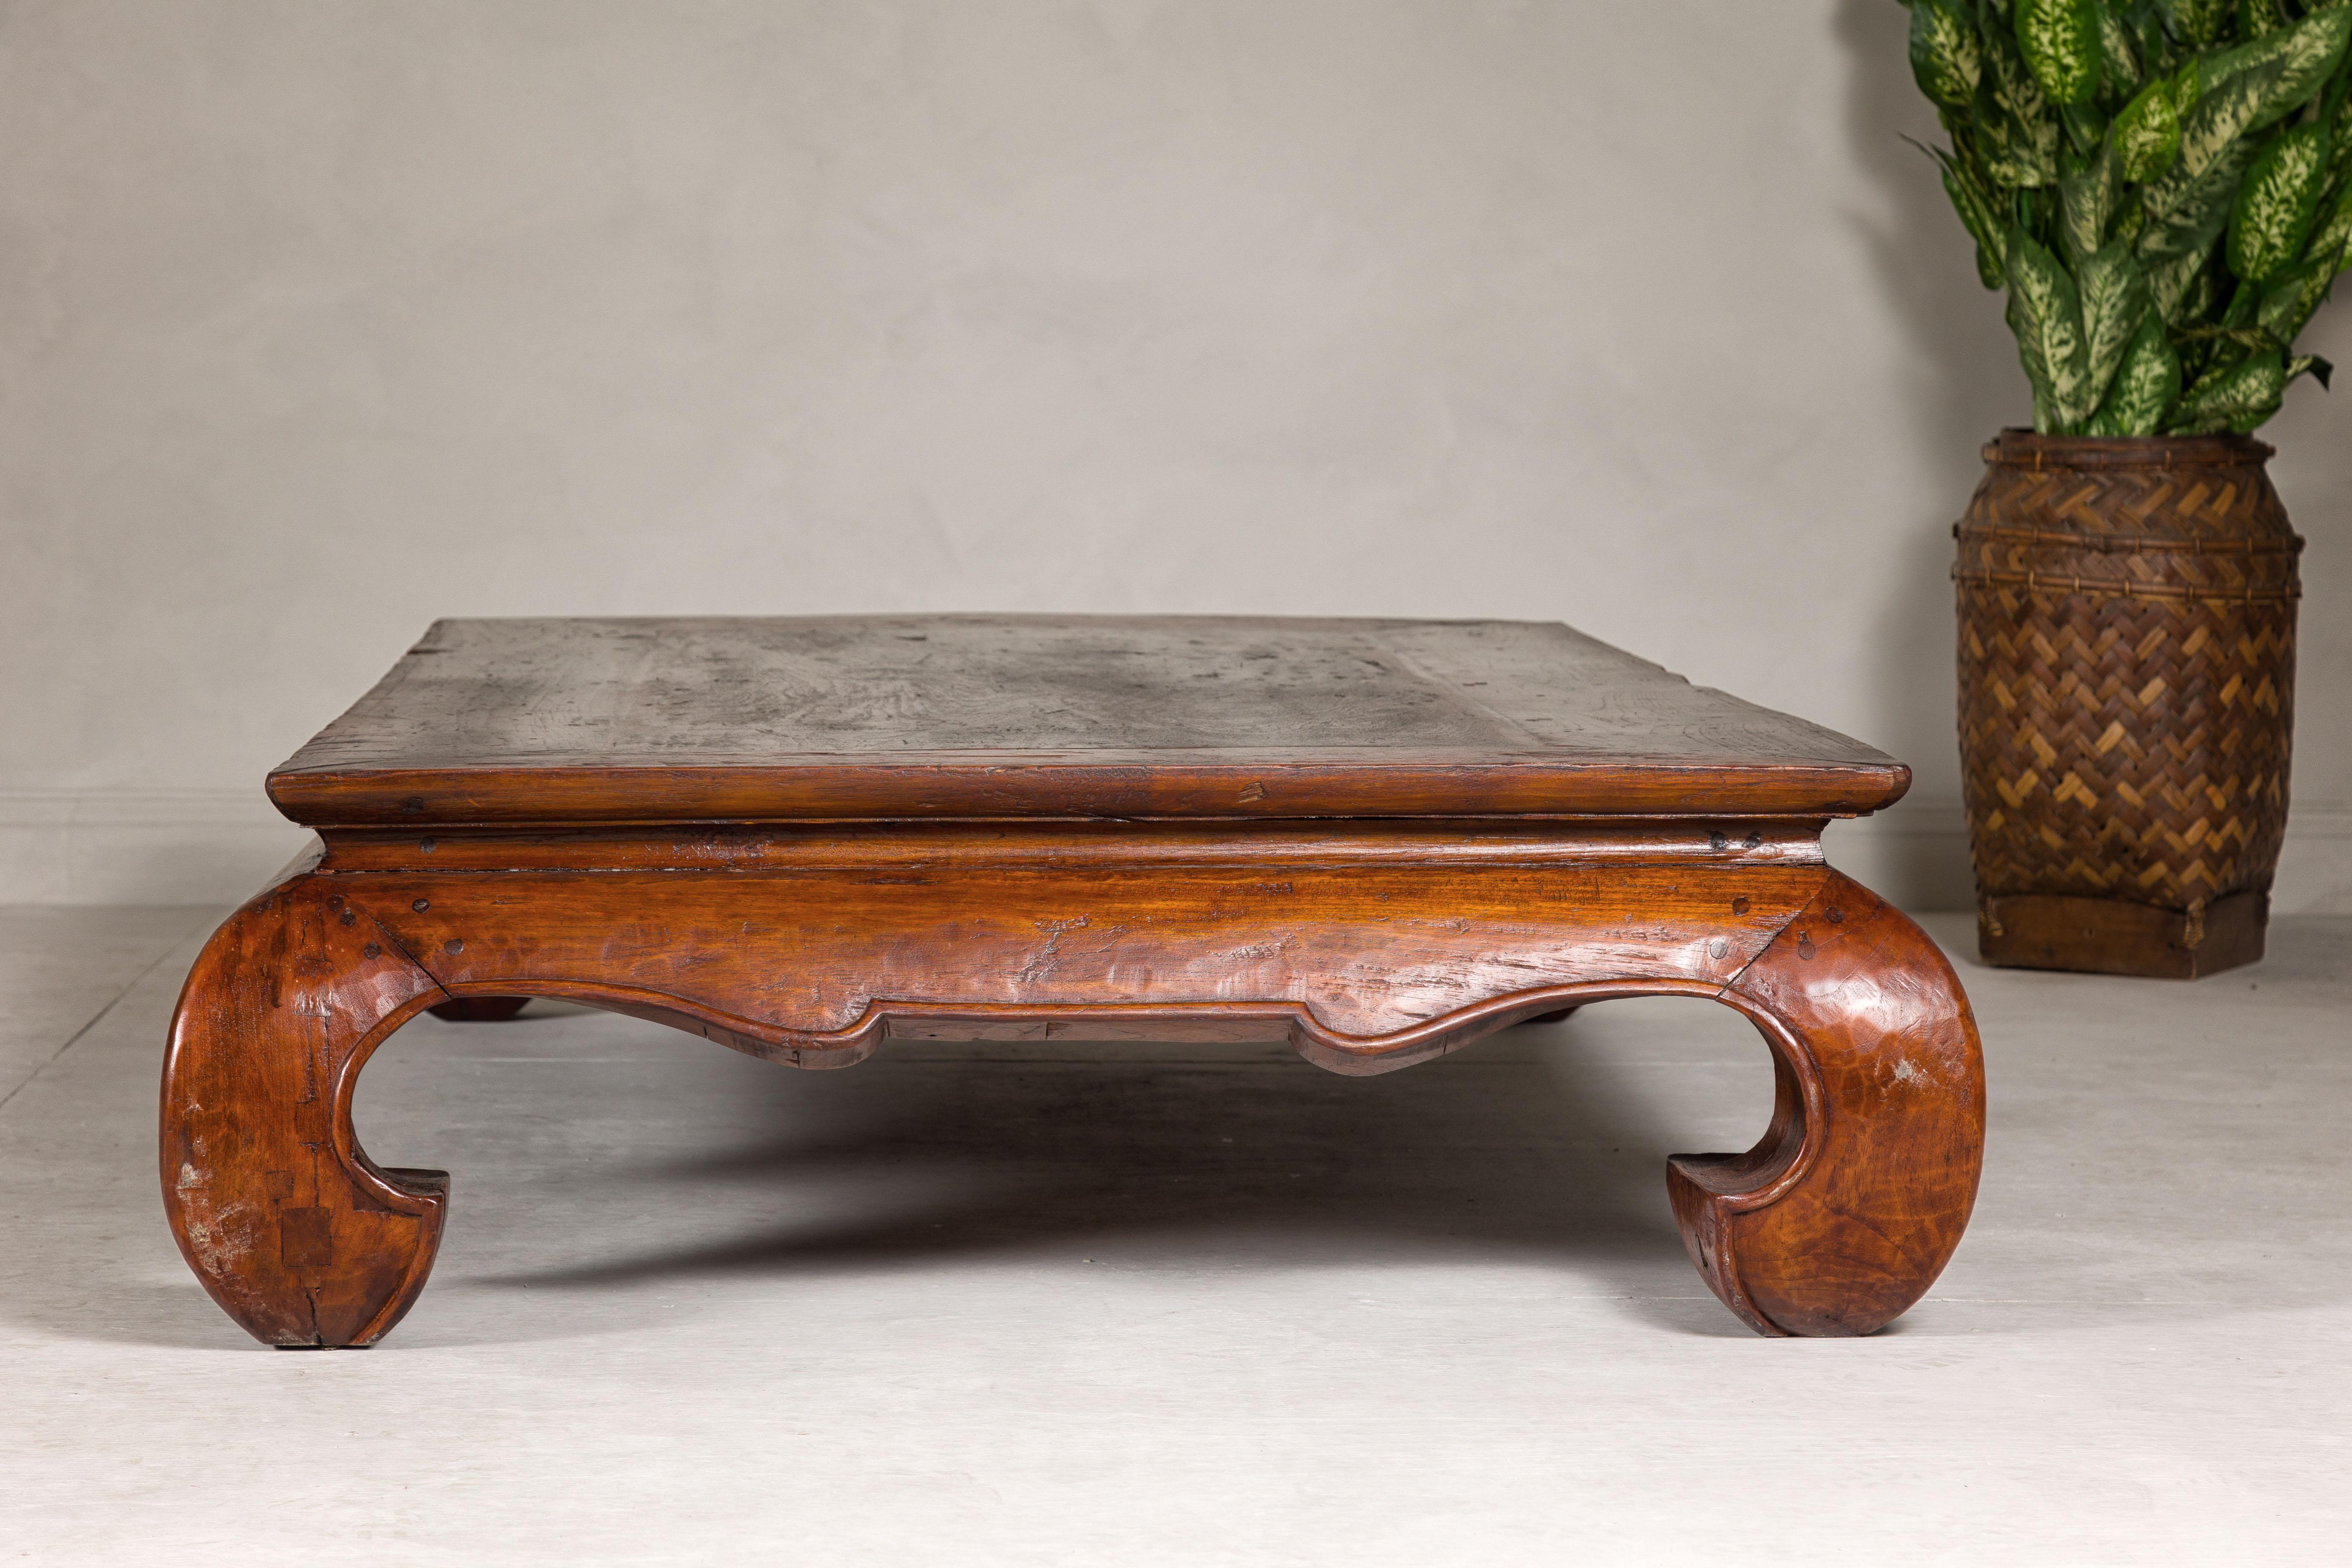 Qing Dynasty 19th Century Chow Leg Kang Table with Weathered Rustic Patina For Sale 11